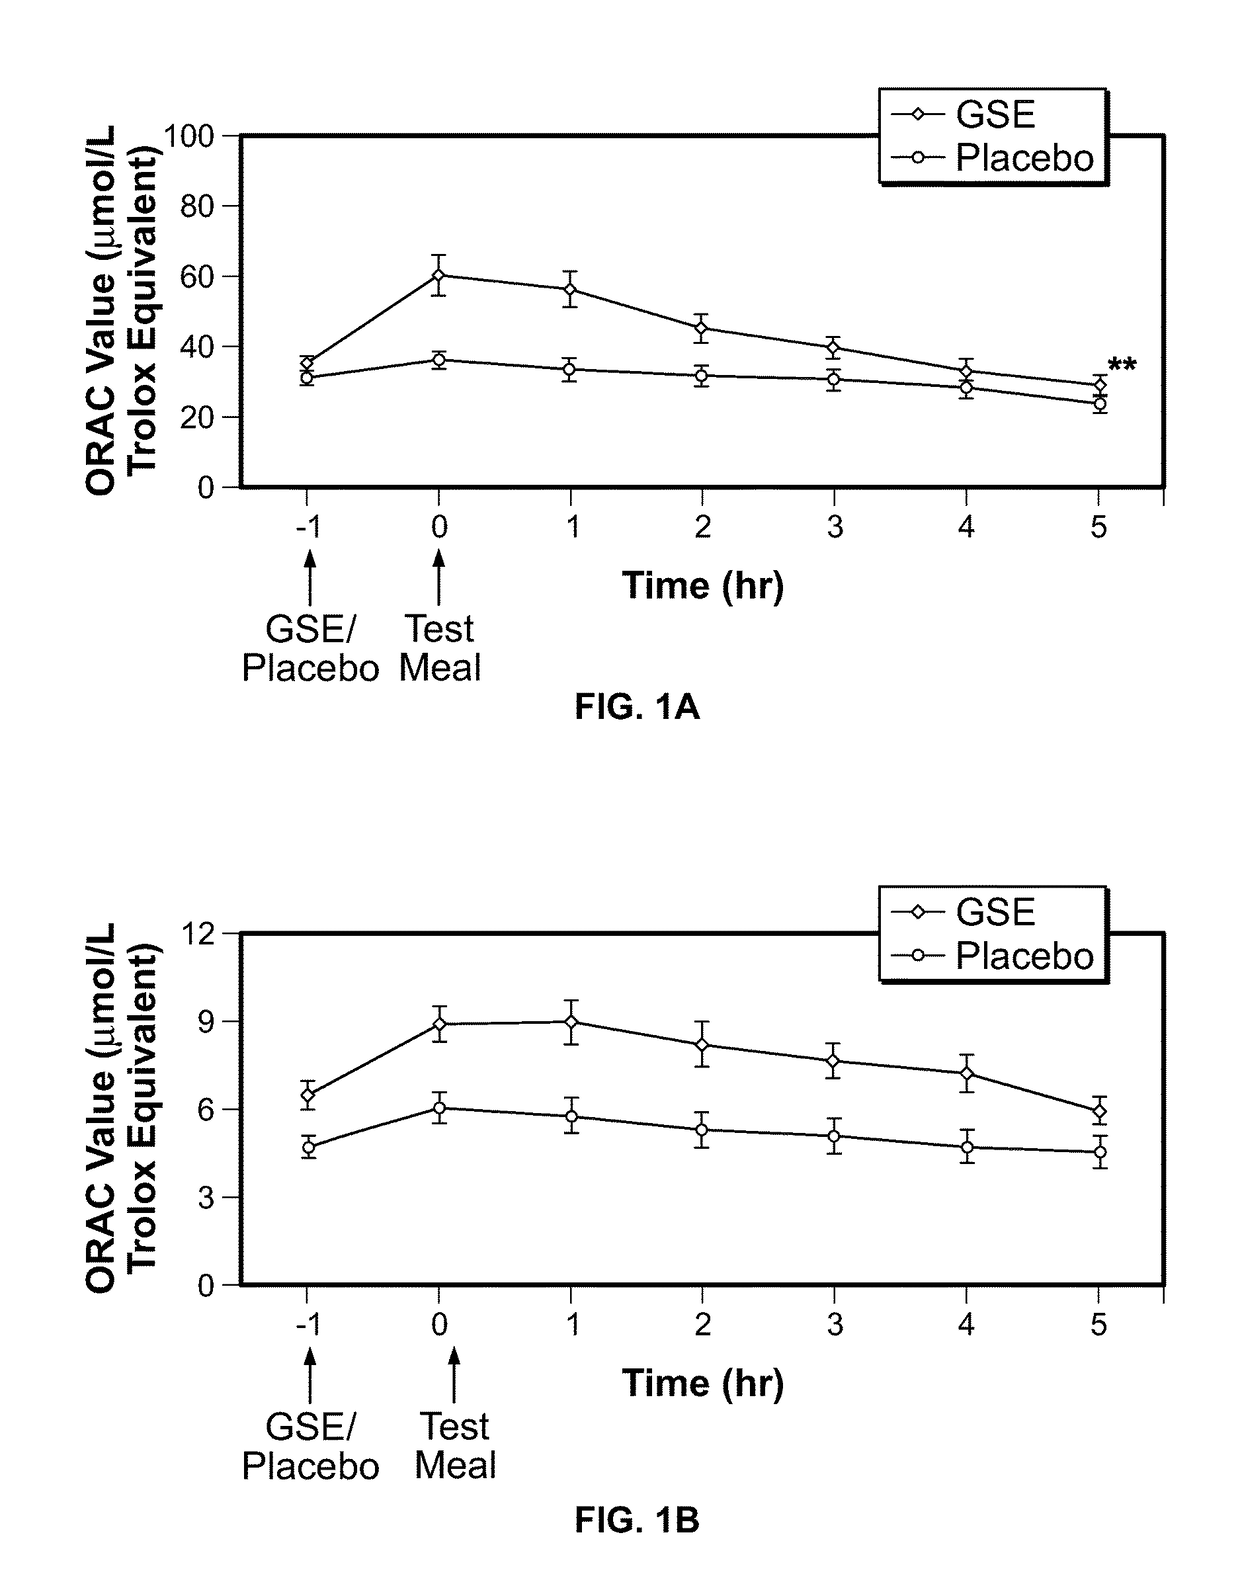 Modulation of oxidative stress, inflammation, and impaired insulin sensitivity with grape seed extract